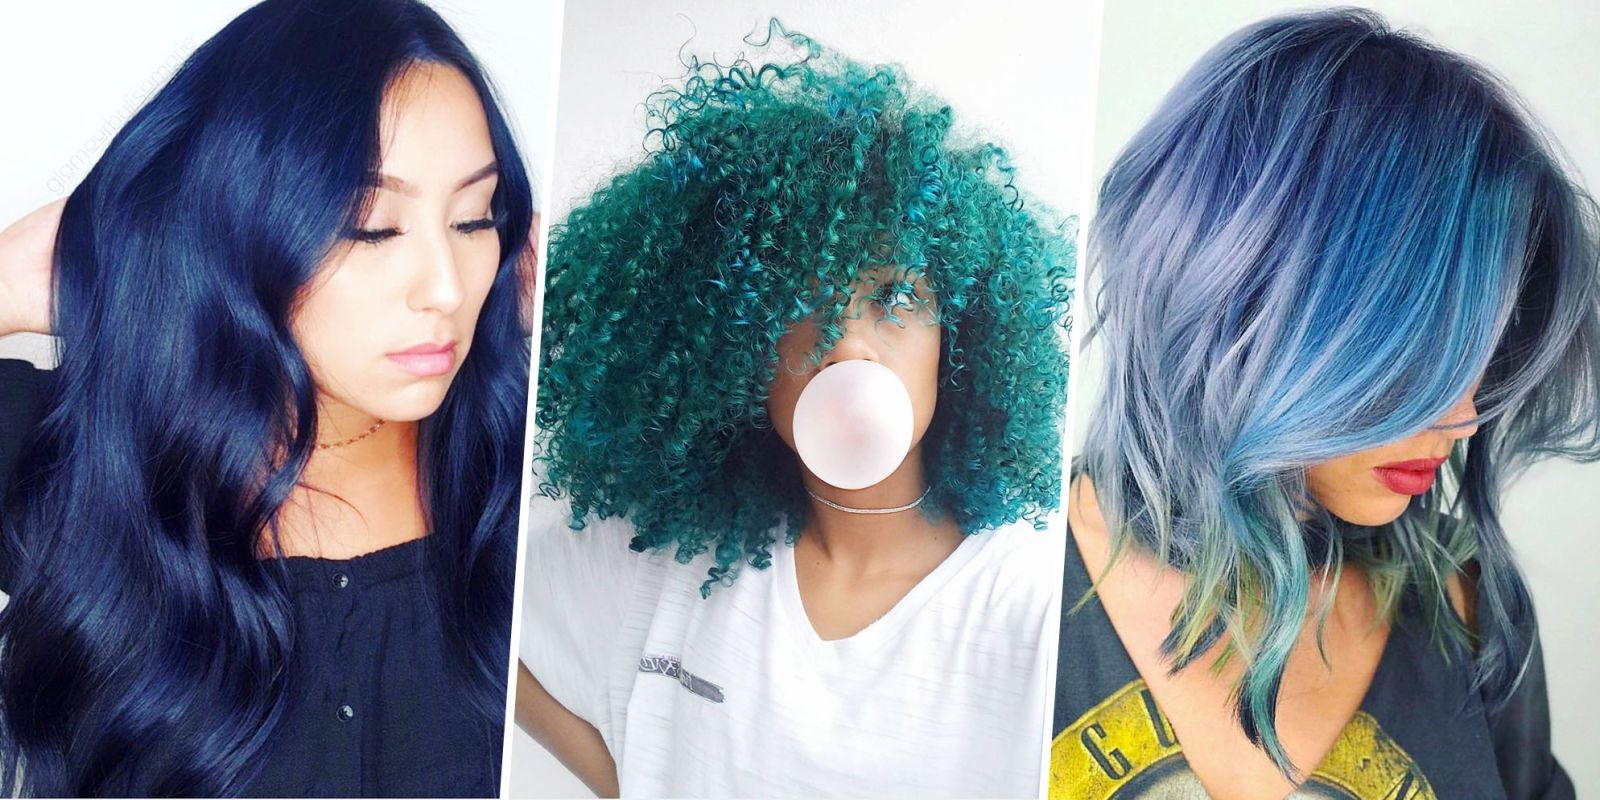 15 Best Blue Hairstyle Ideas - Pretty and Cool Blue Hair Inspo Pics